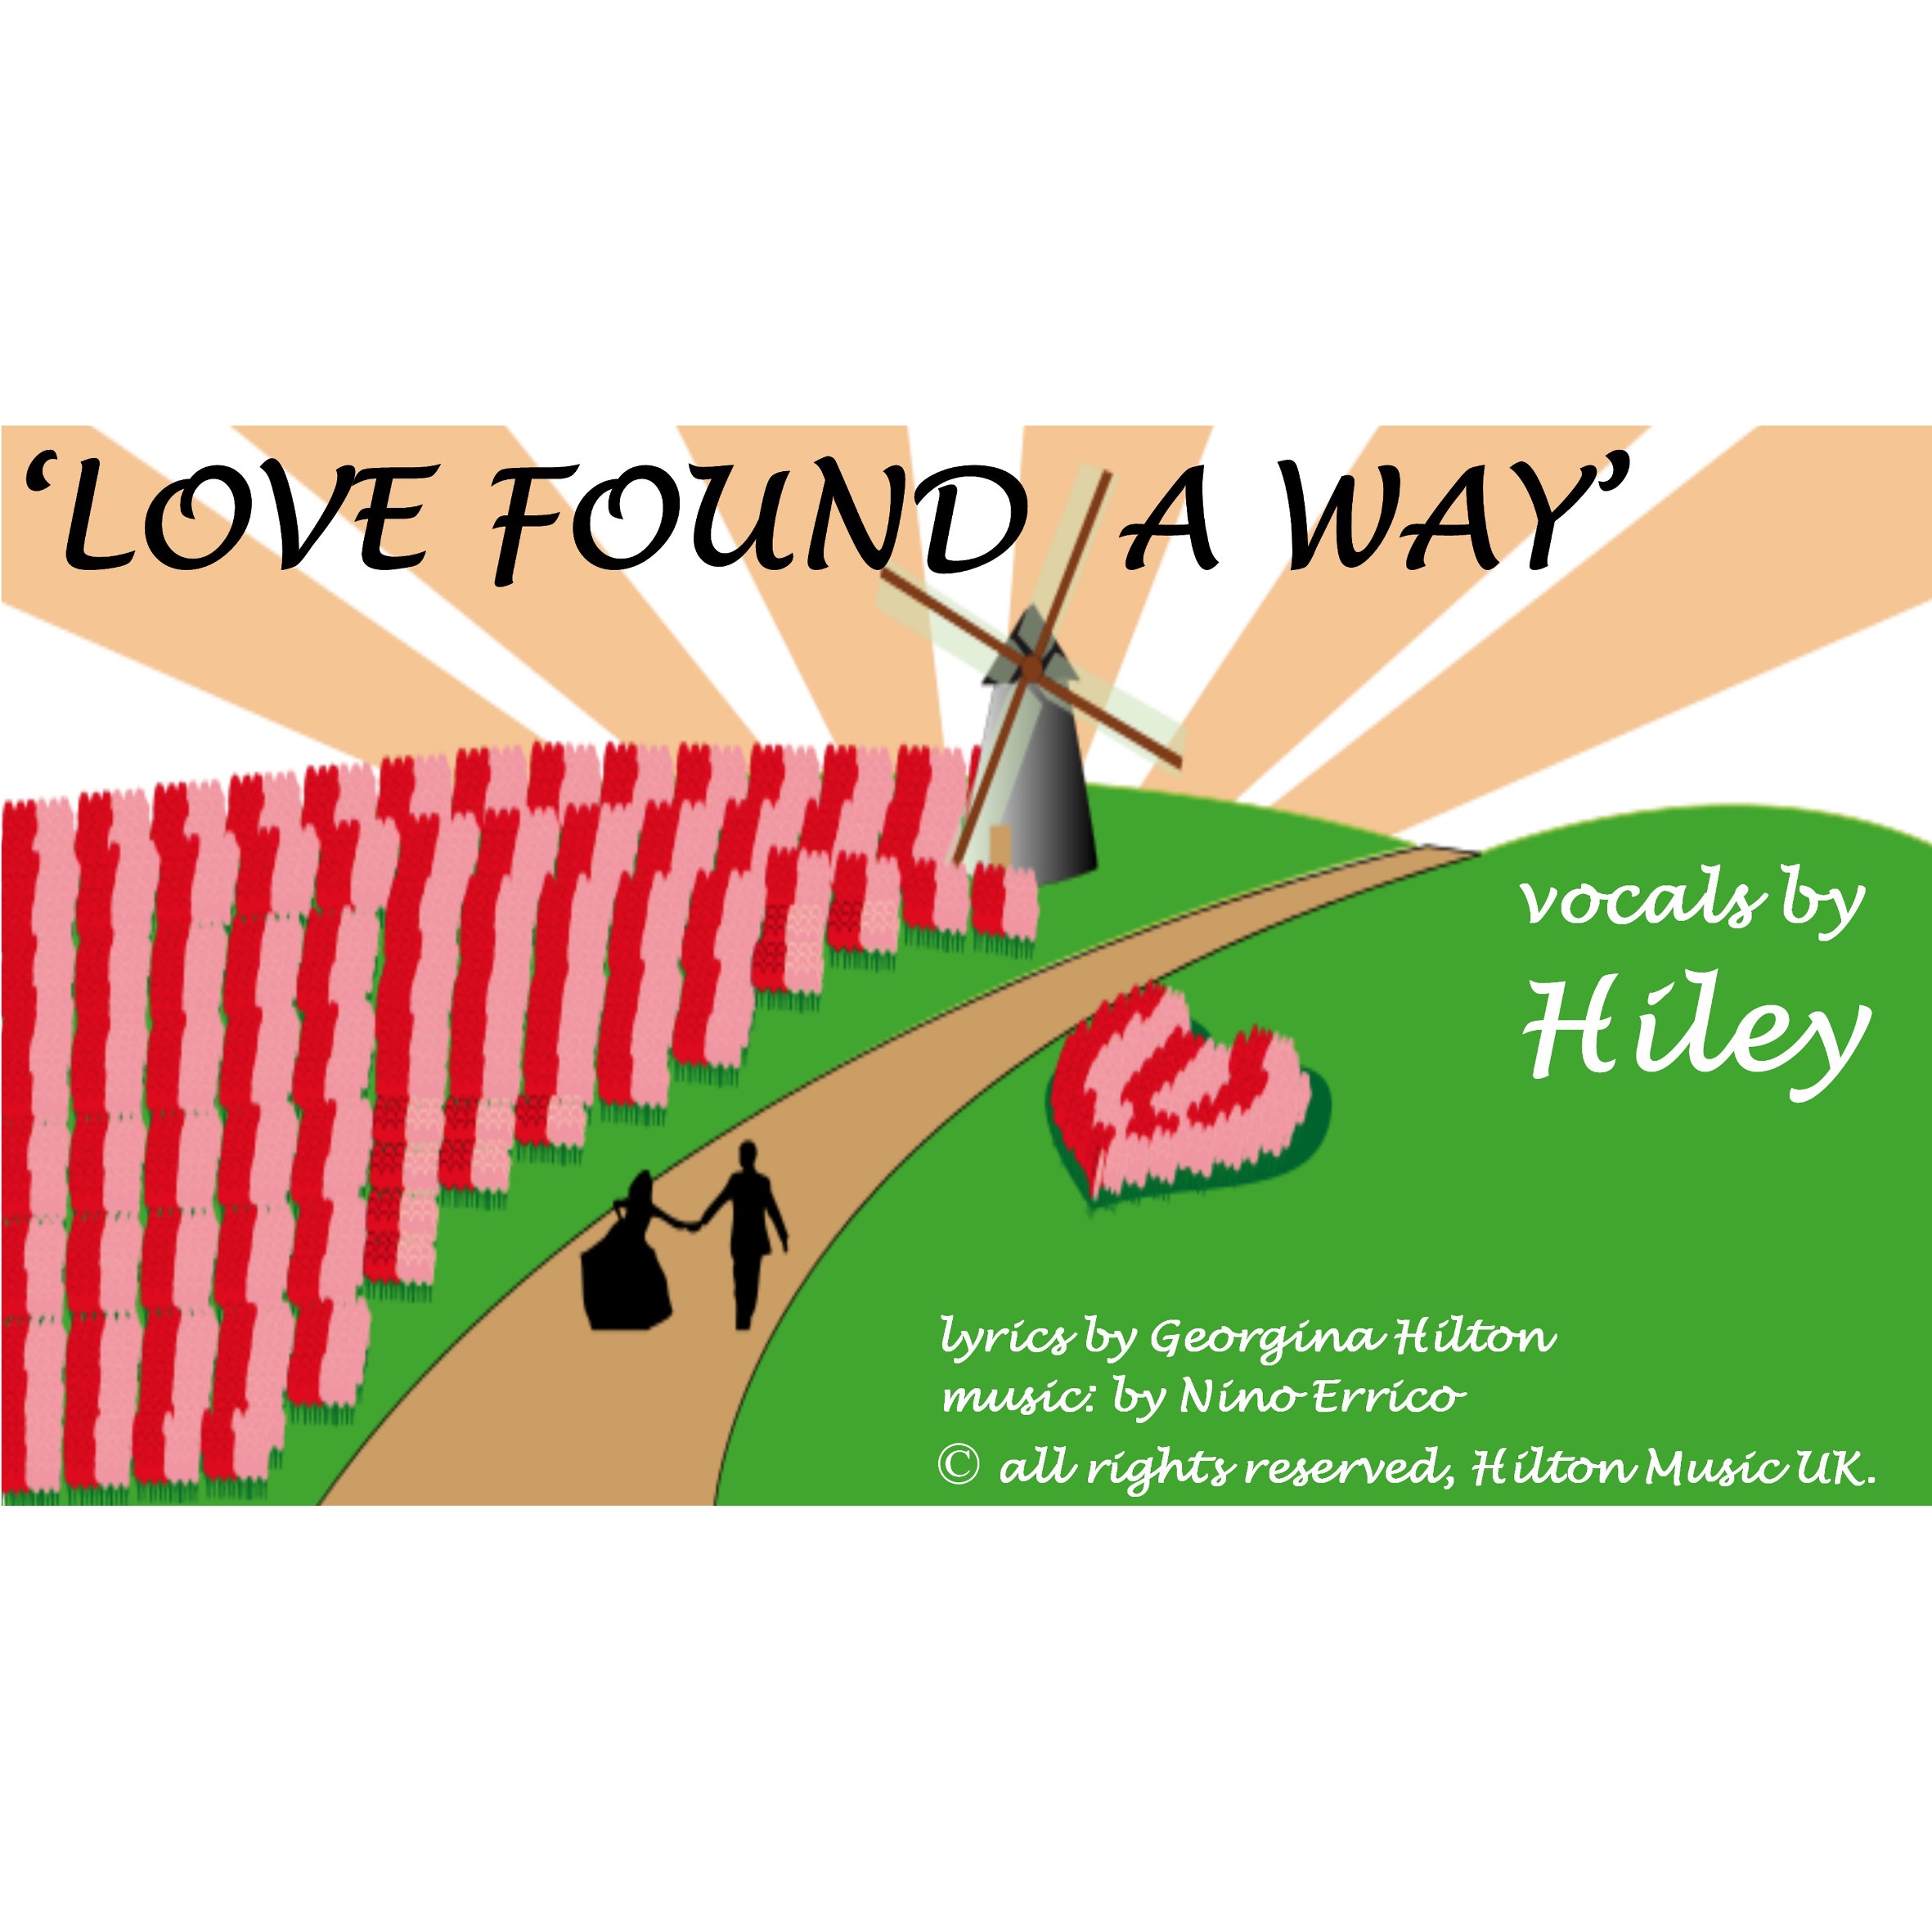 A country style love song for Weddings and Anniversaries, possible duet:  'LOVE FOUND A WAY'  Hiley sings for  Hilton Music UK